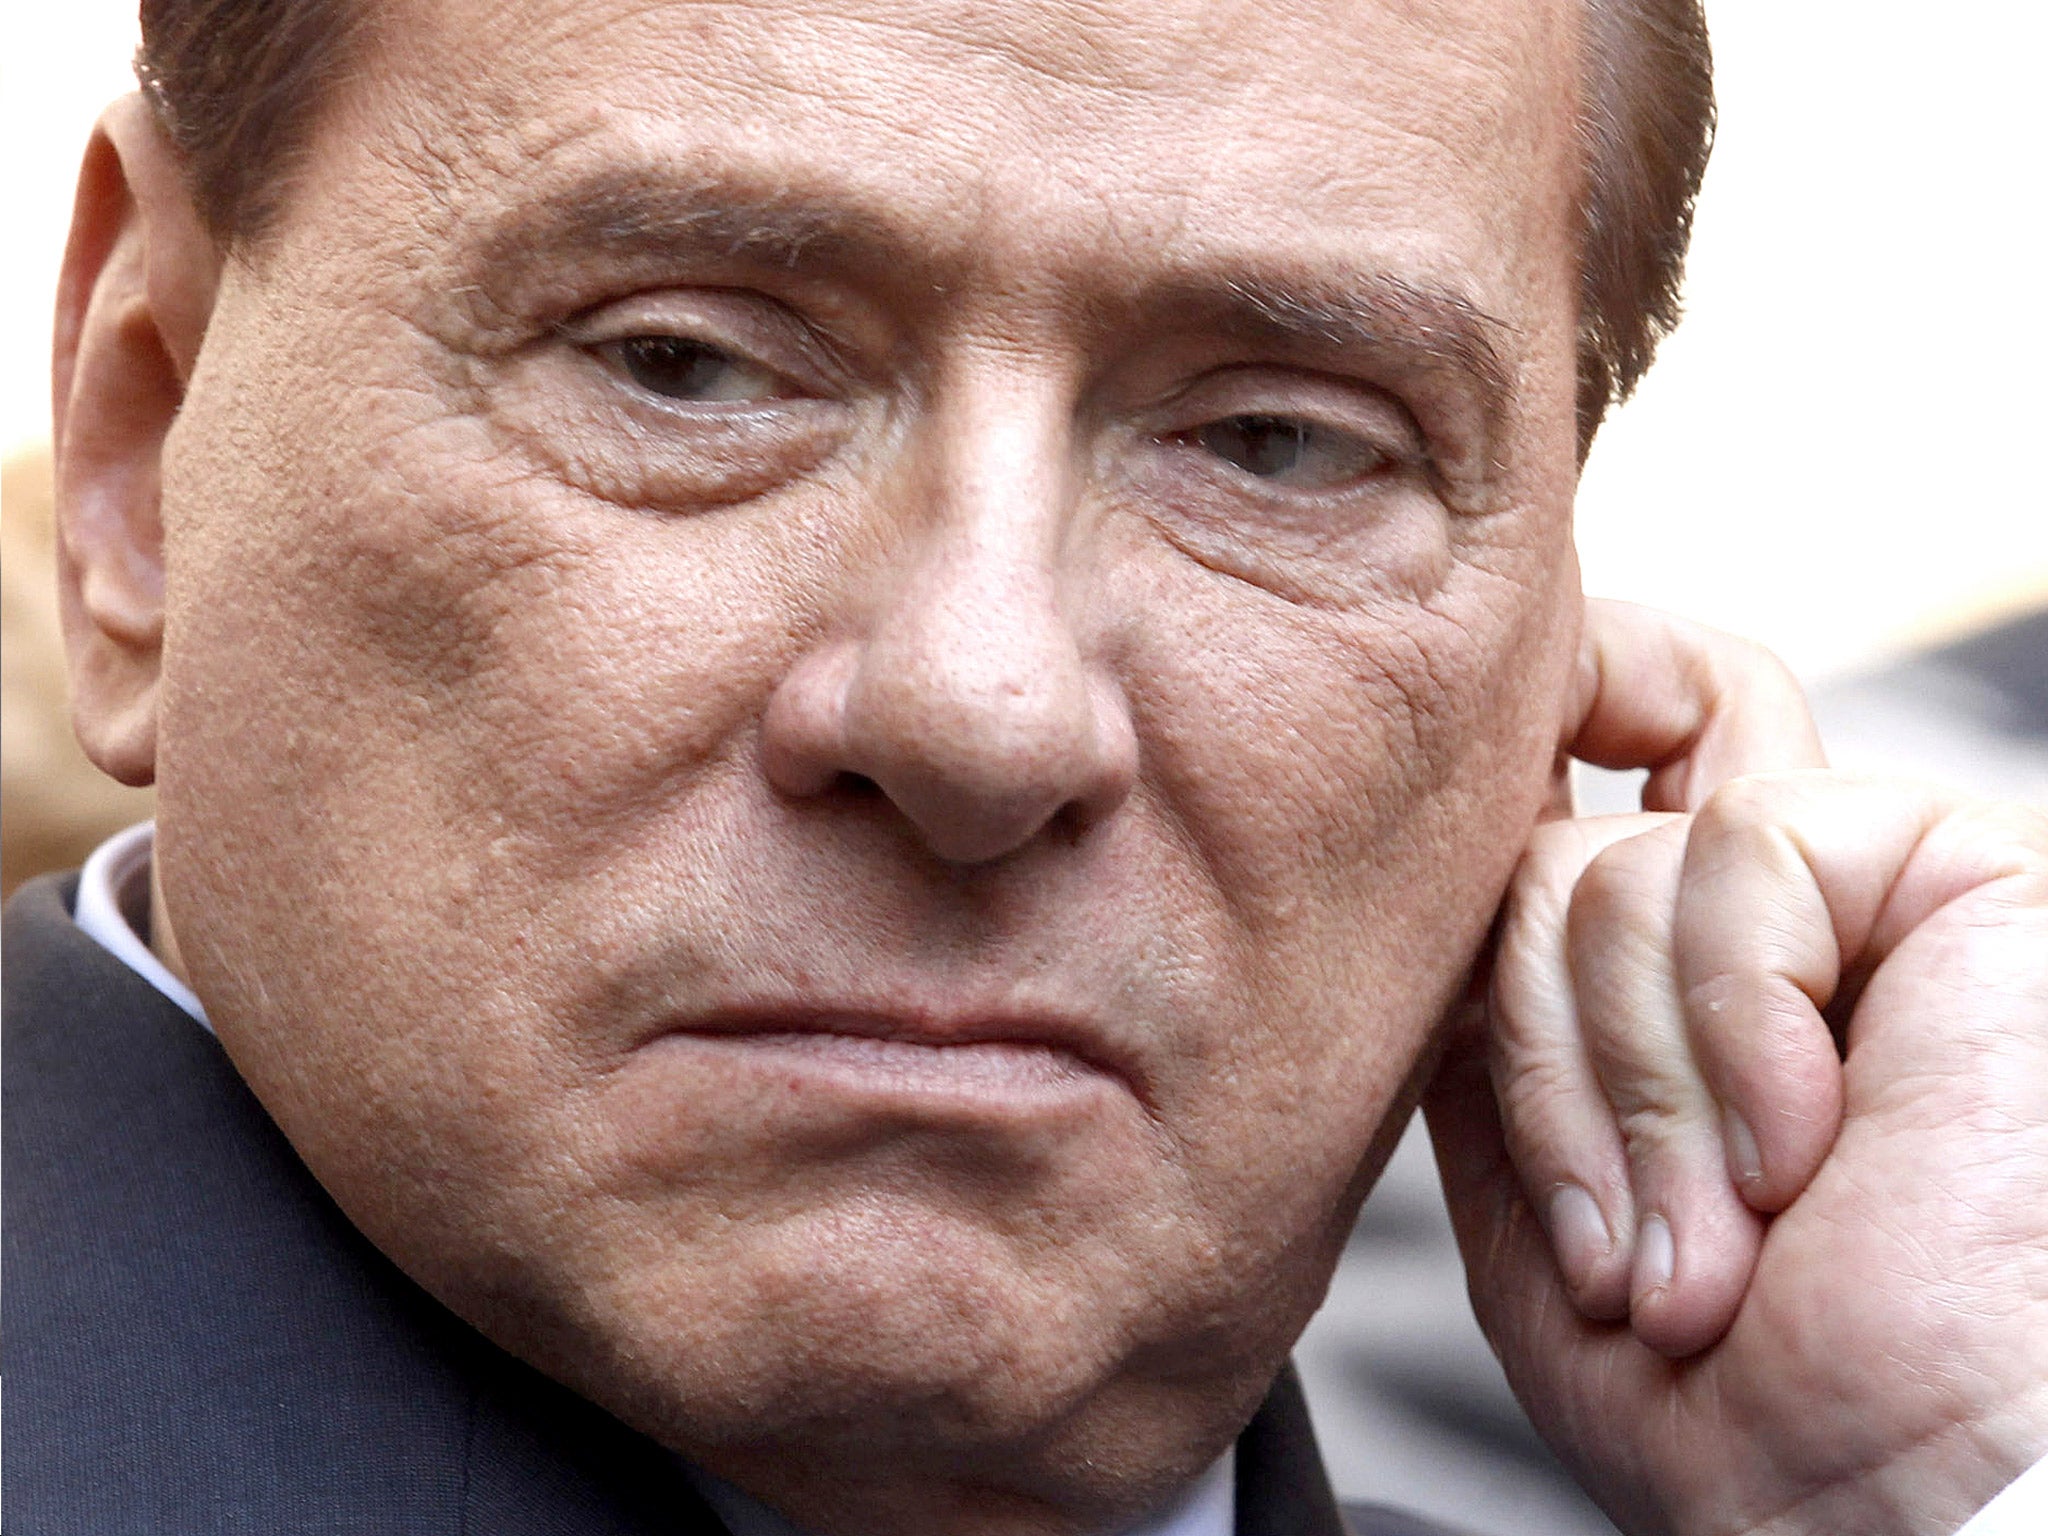 Berlusconi was convicted for tax fraud last November